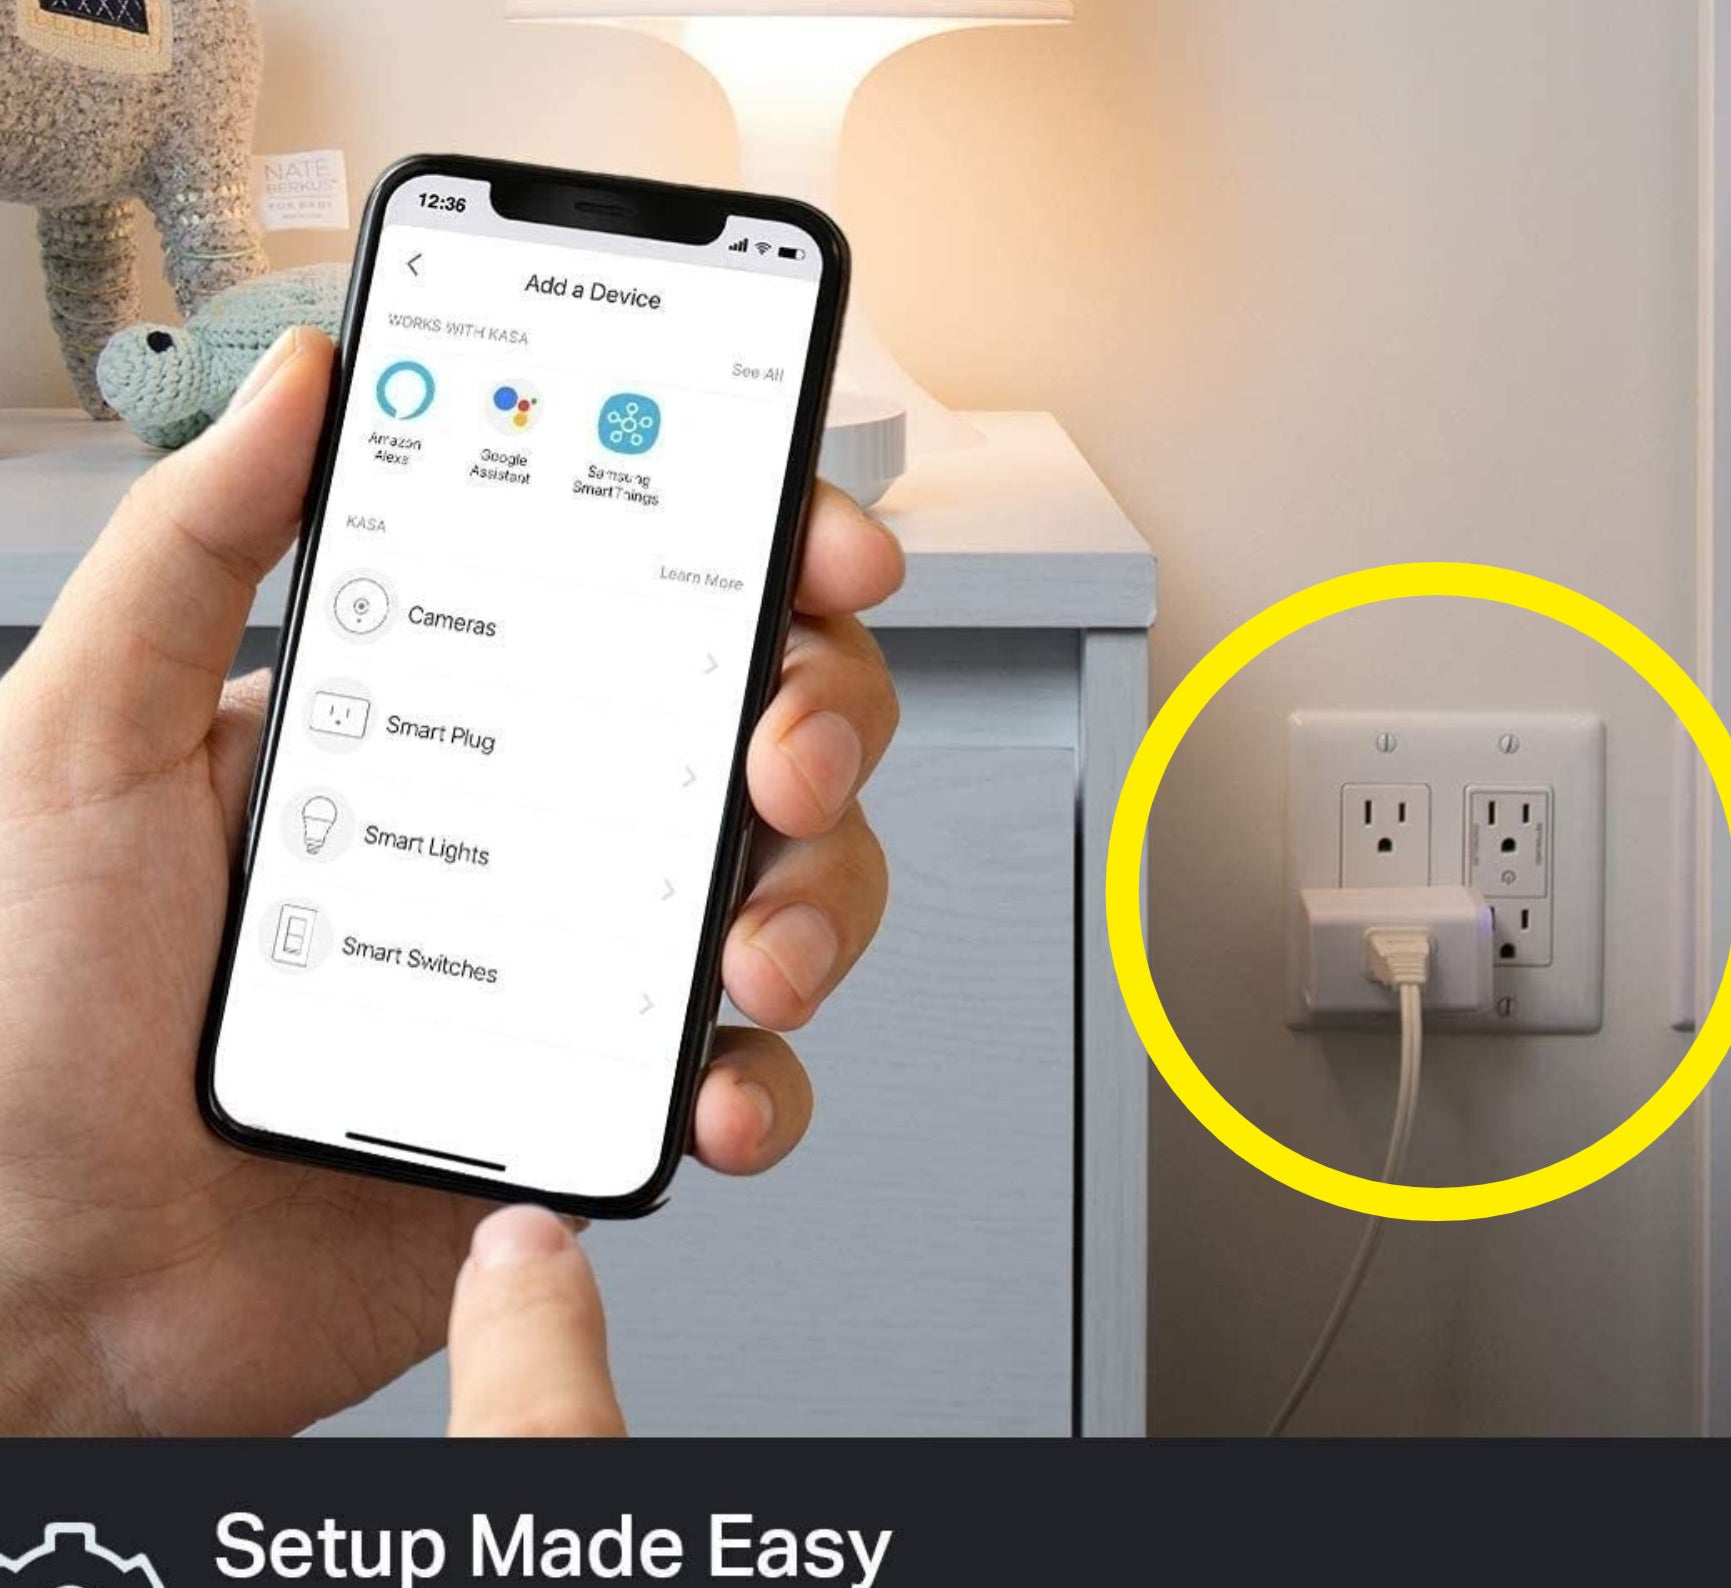 a person holding a phone next to the smart plug, which is circled